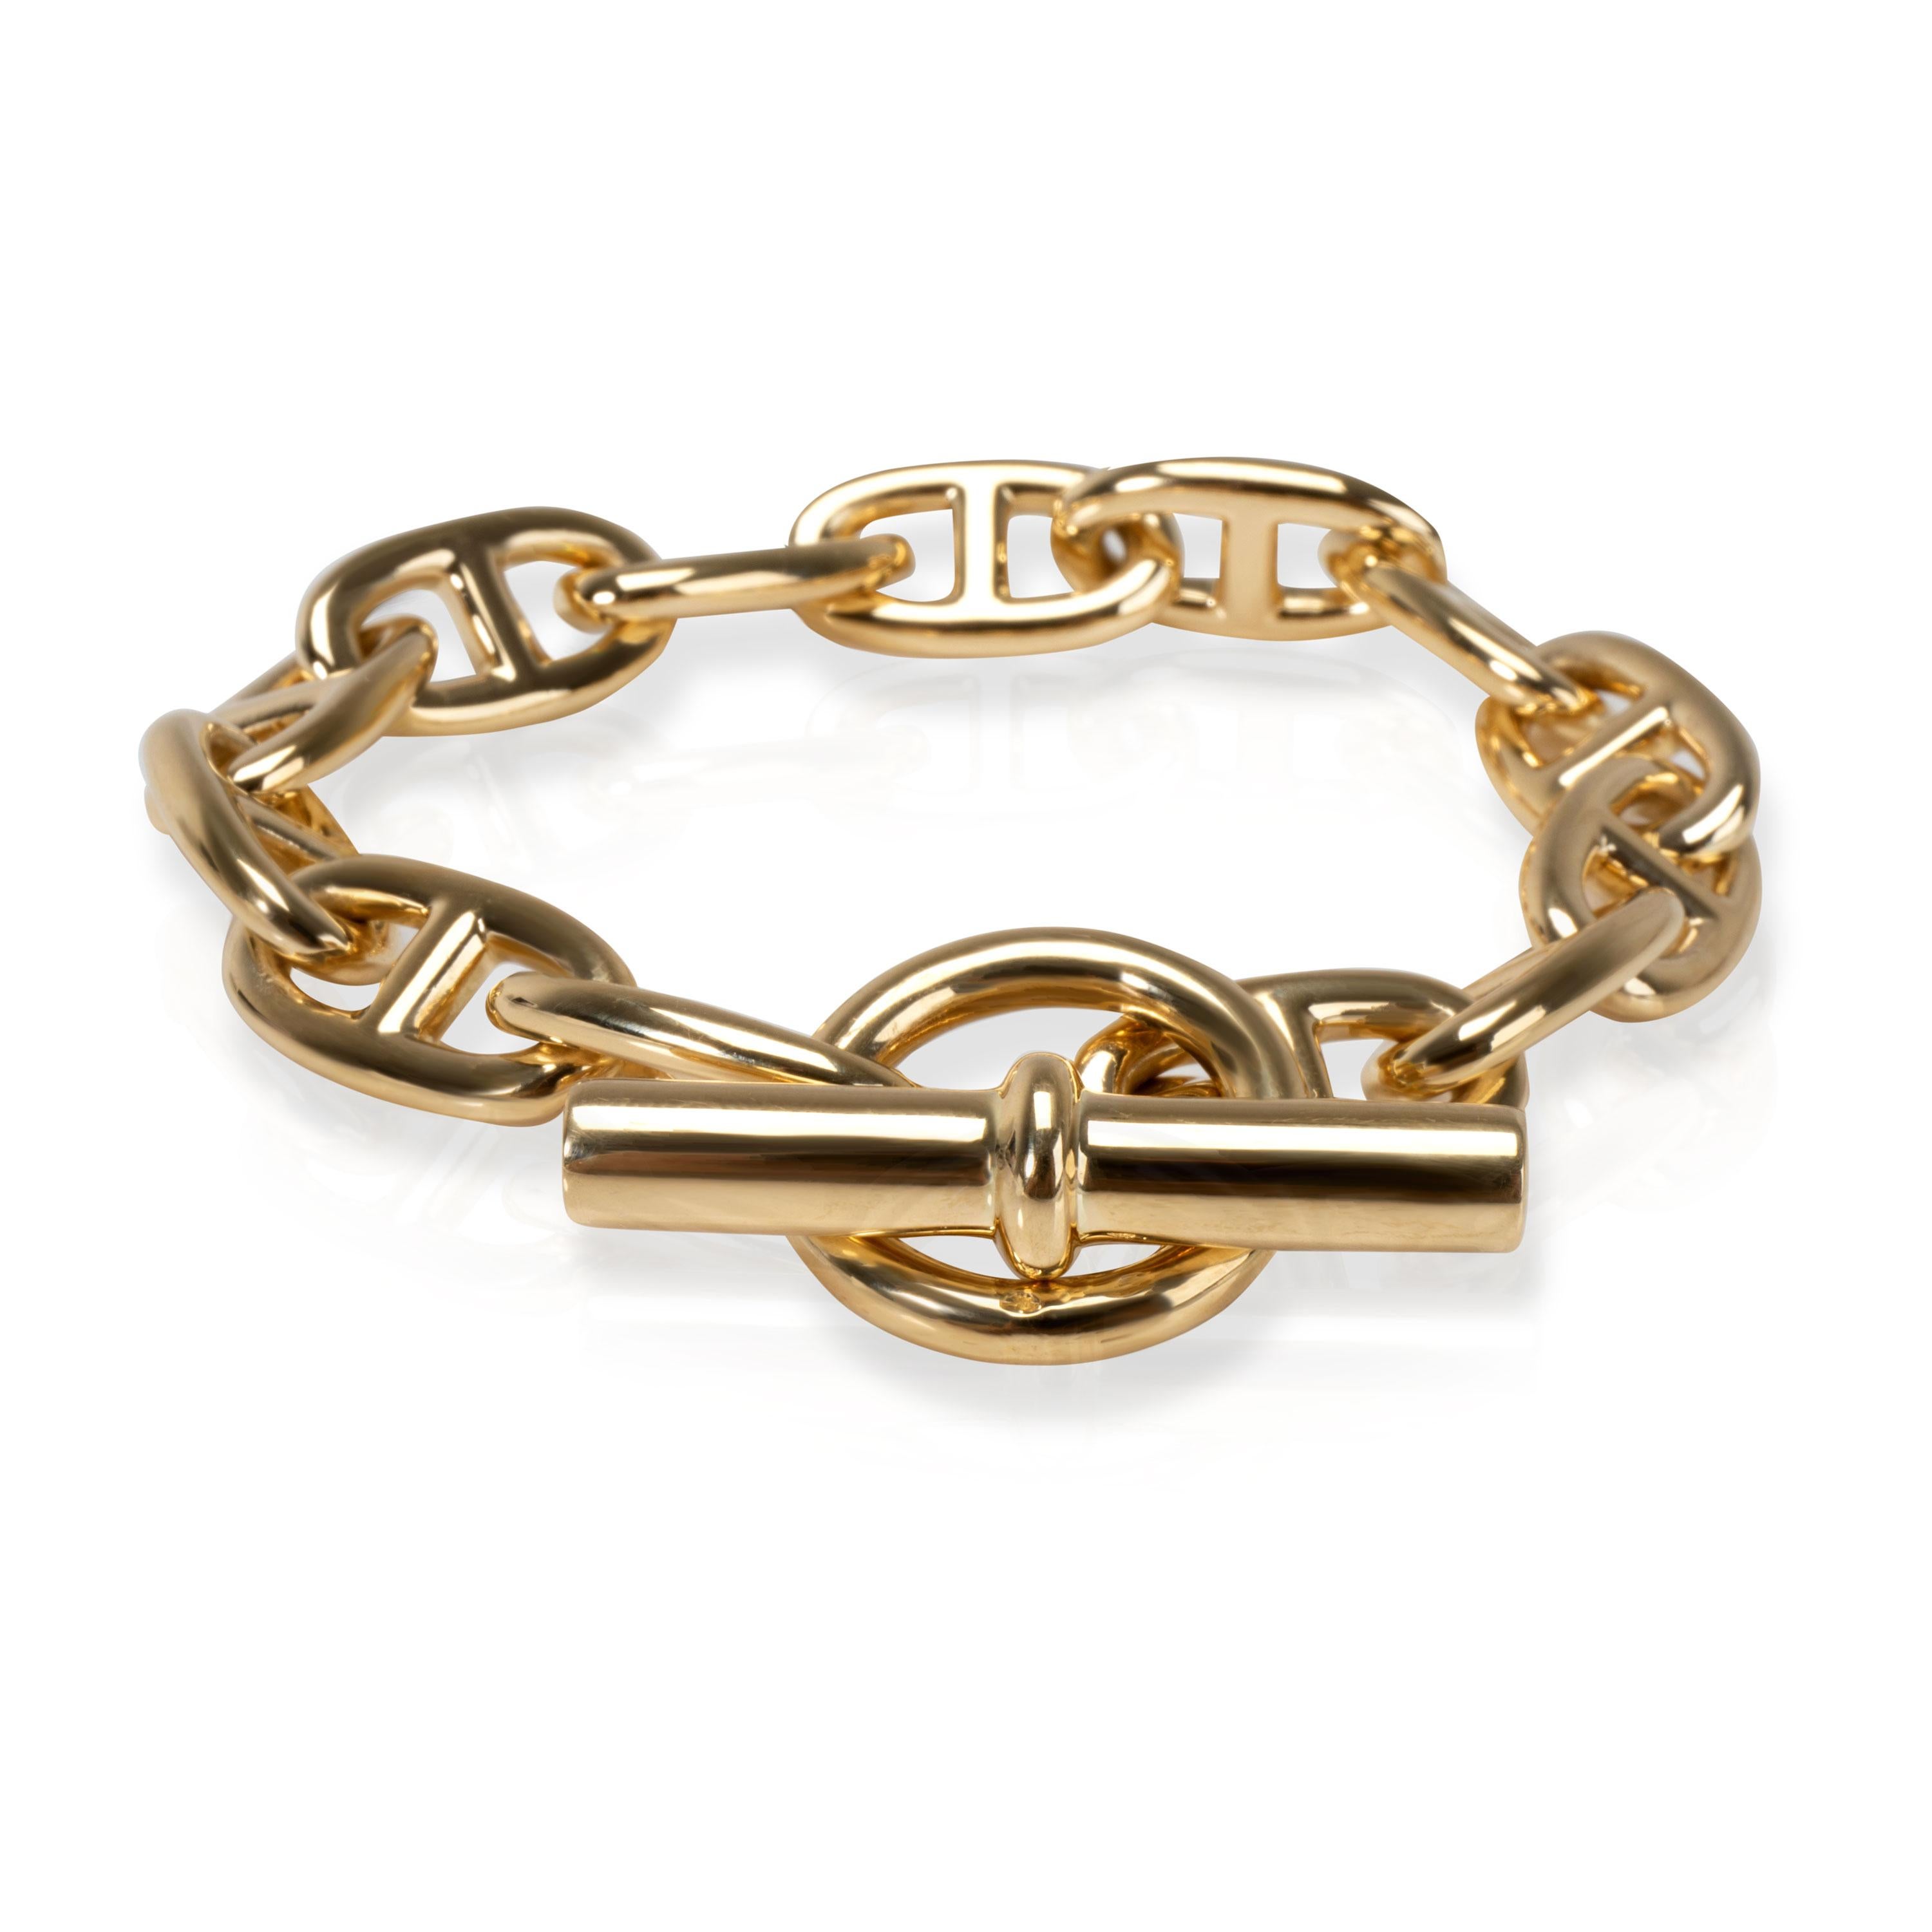 
Hermès Chaine D'ancre Toggle Bracelet in 18K Yellow Gold

PRIMARY DETAILS

SKU: 105475

Condition Description: Retails for 17,900 USD. In excellent condition and recently polished. Bracelet is 8.5 inches in length. Comes with the original